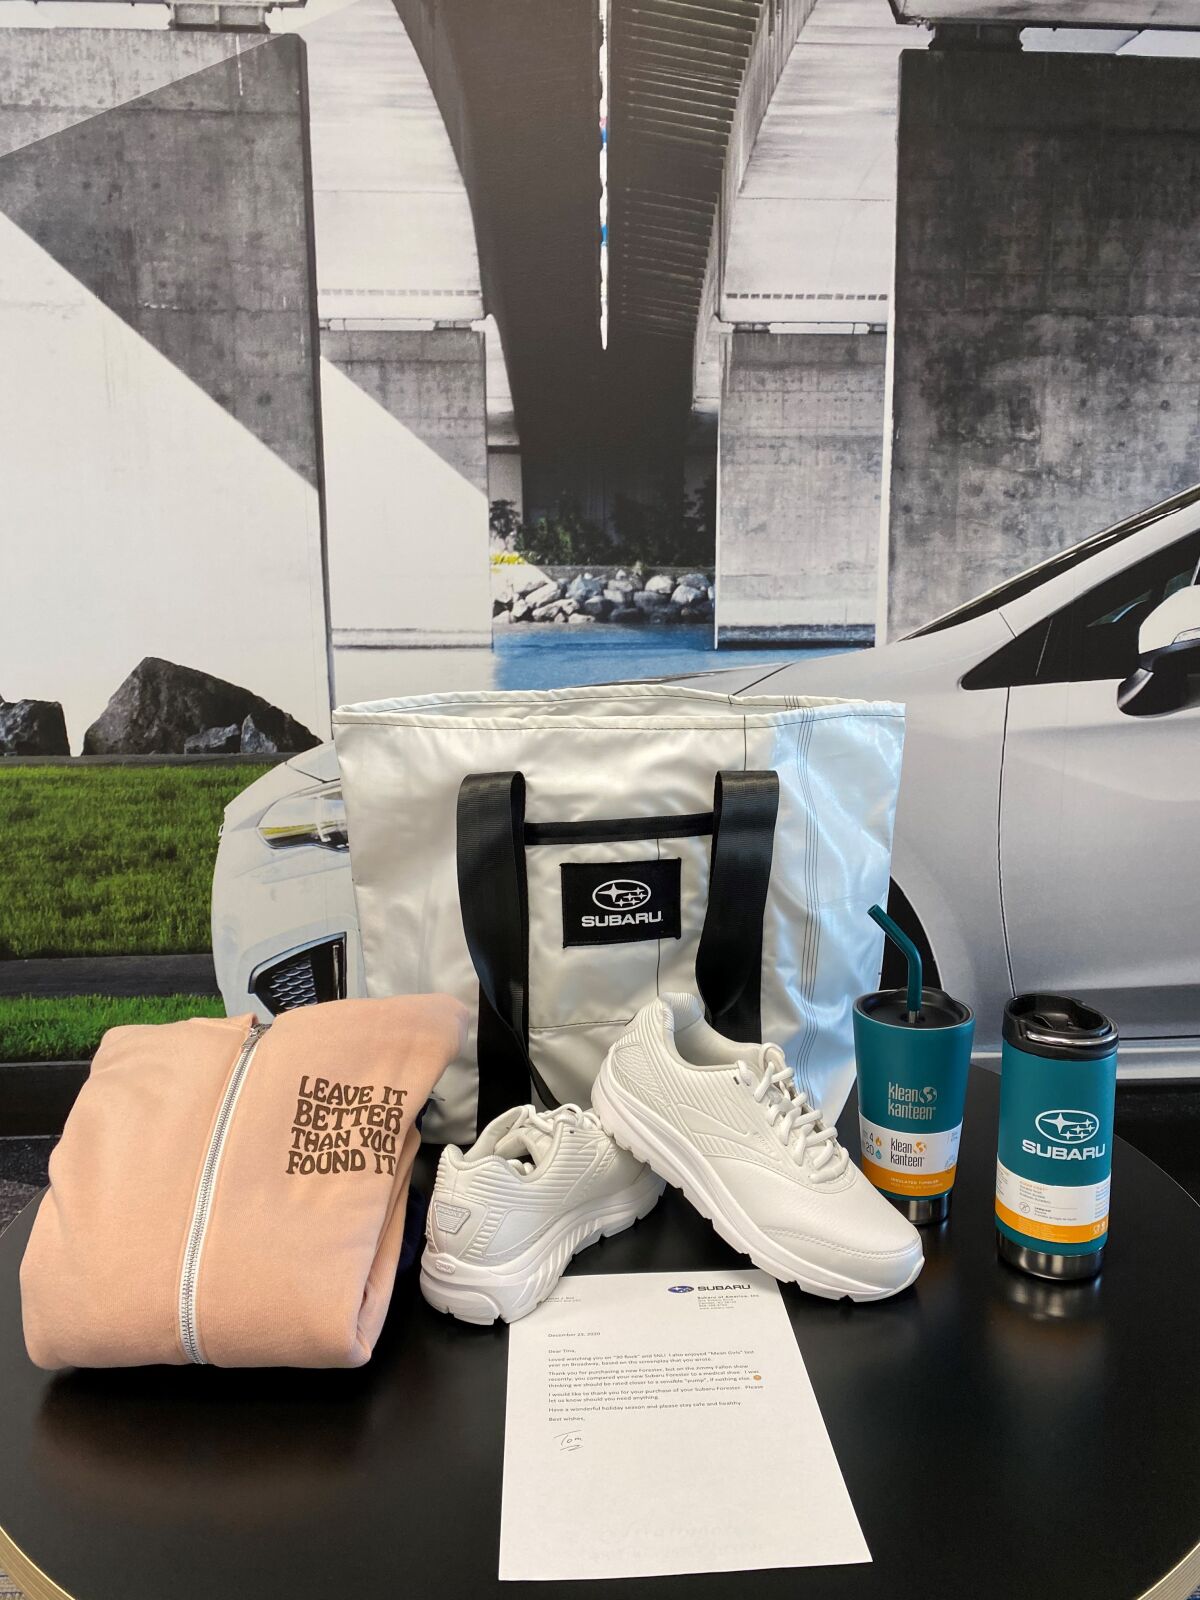 Shoes and other swag that automaker Subaru sent actress-writer Tina Fey.